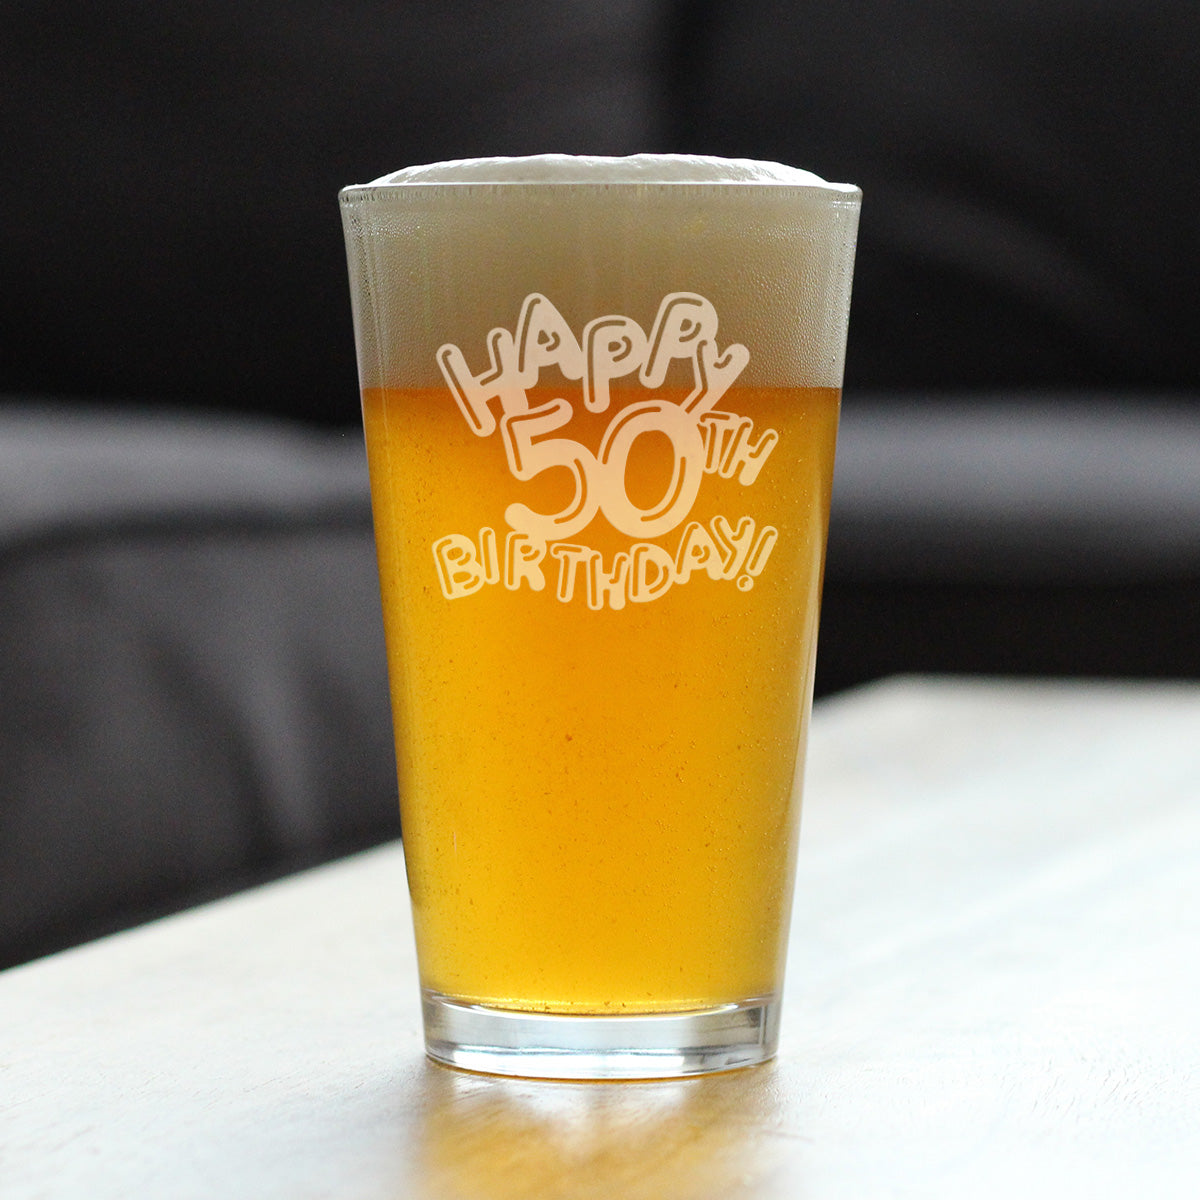 Happy 50th Birthday Balloons - Pint Glass for Beer - Gifts for Women &amp; Men Turning 50 - Fun Bday Party Decor - 16 Oz